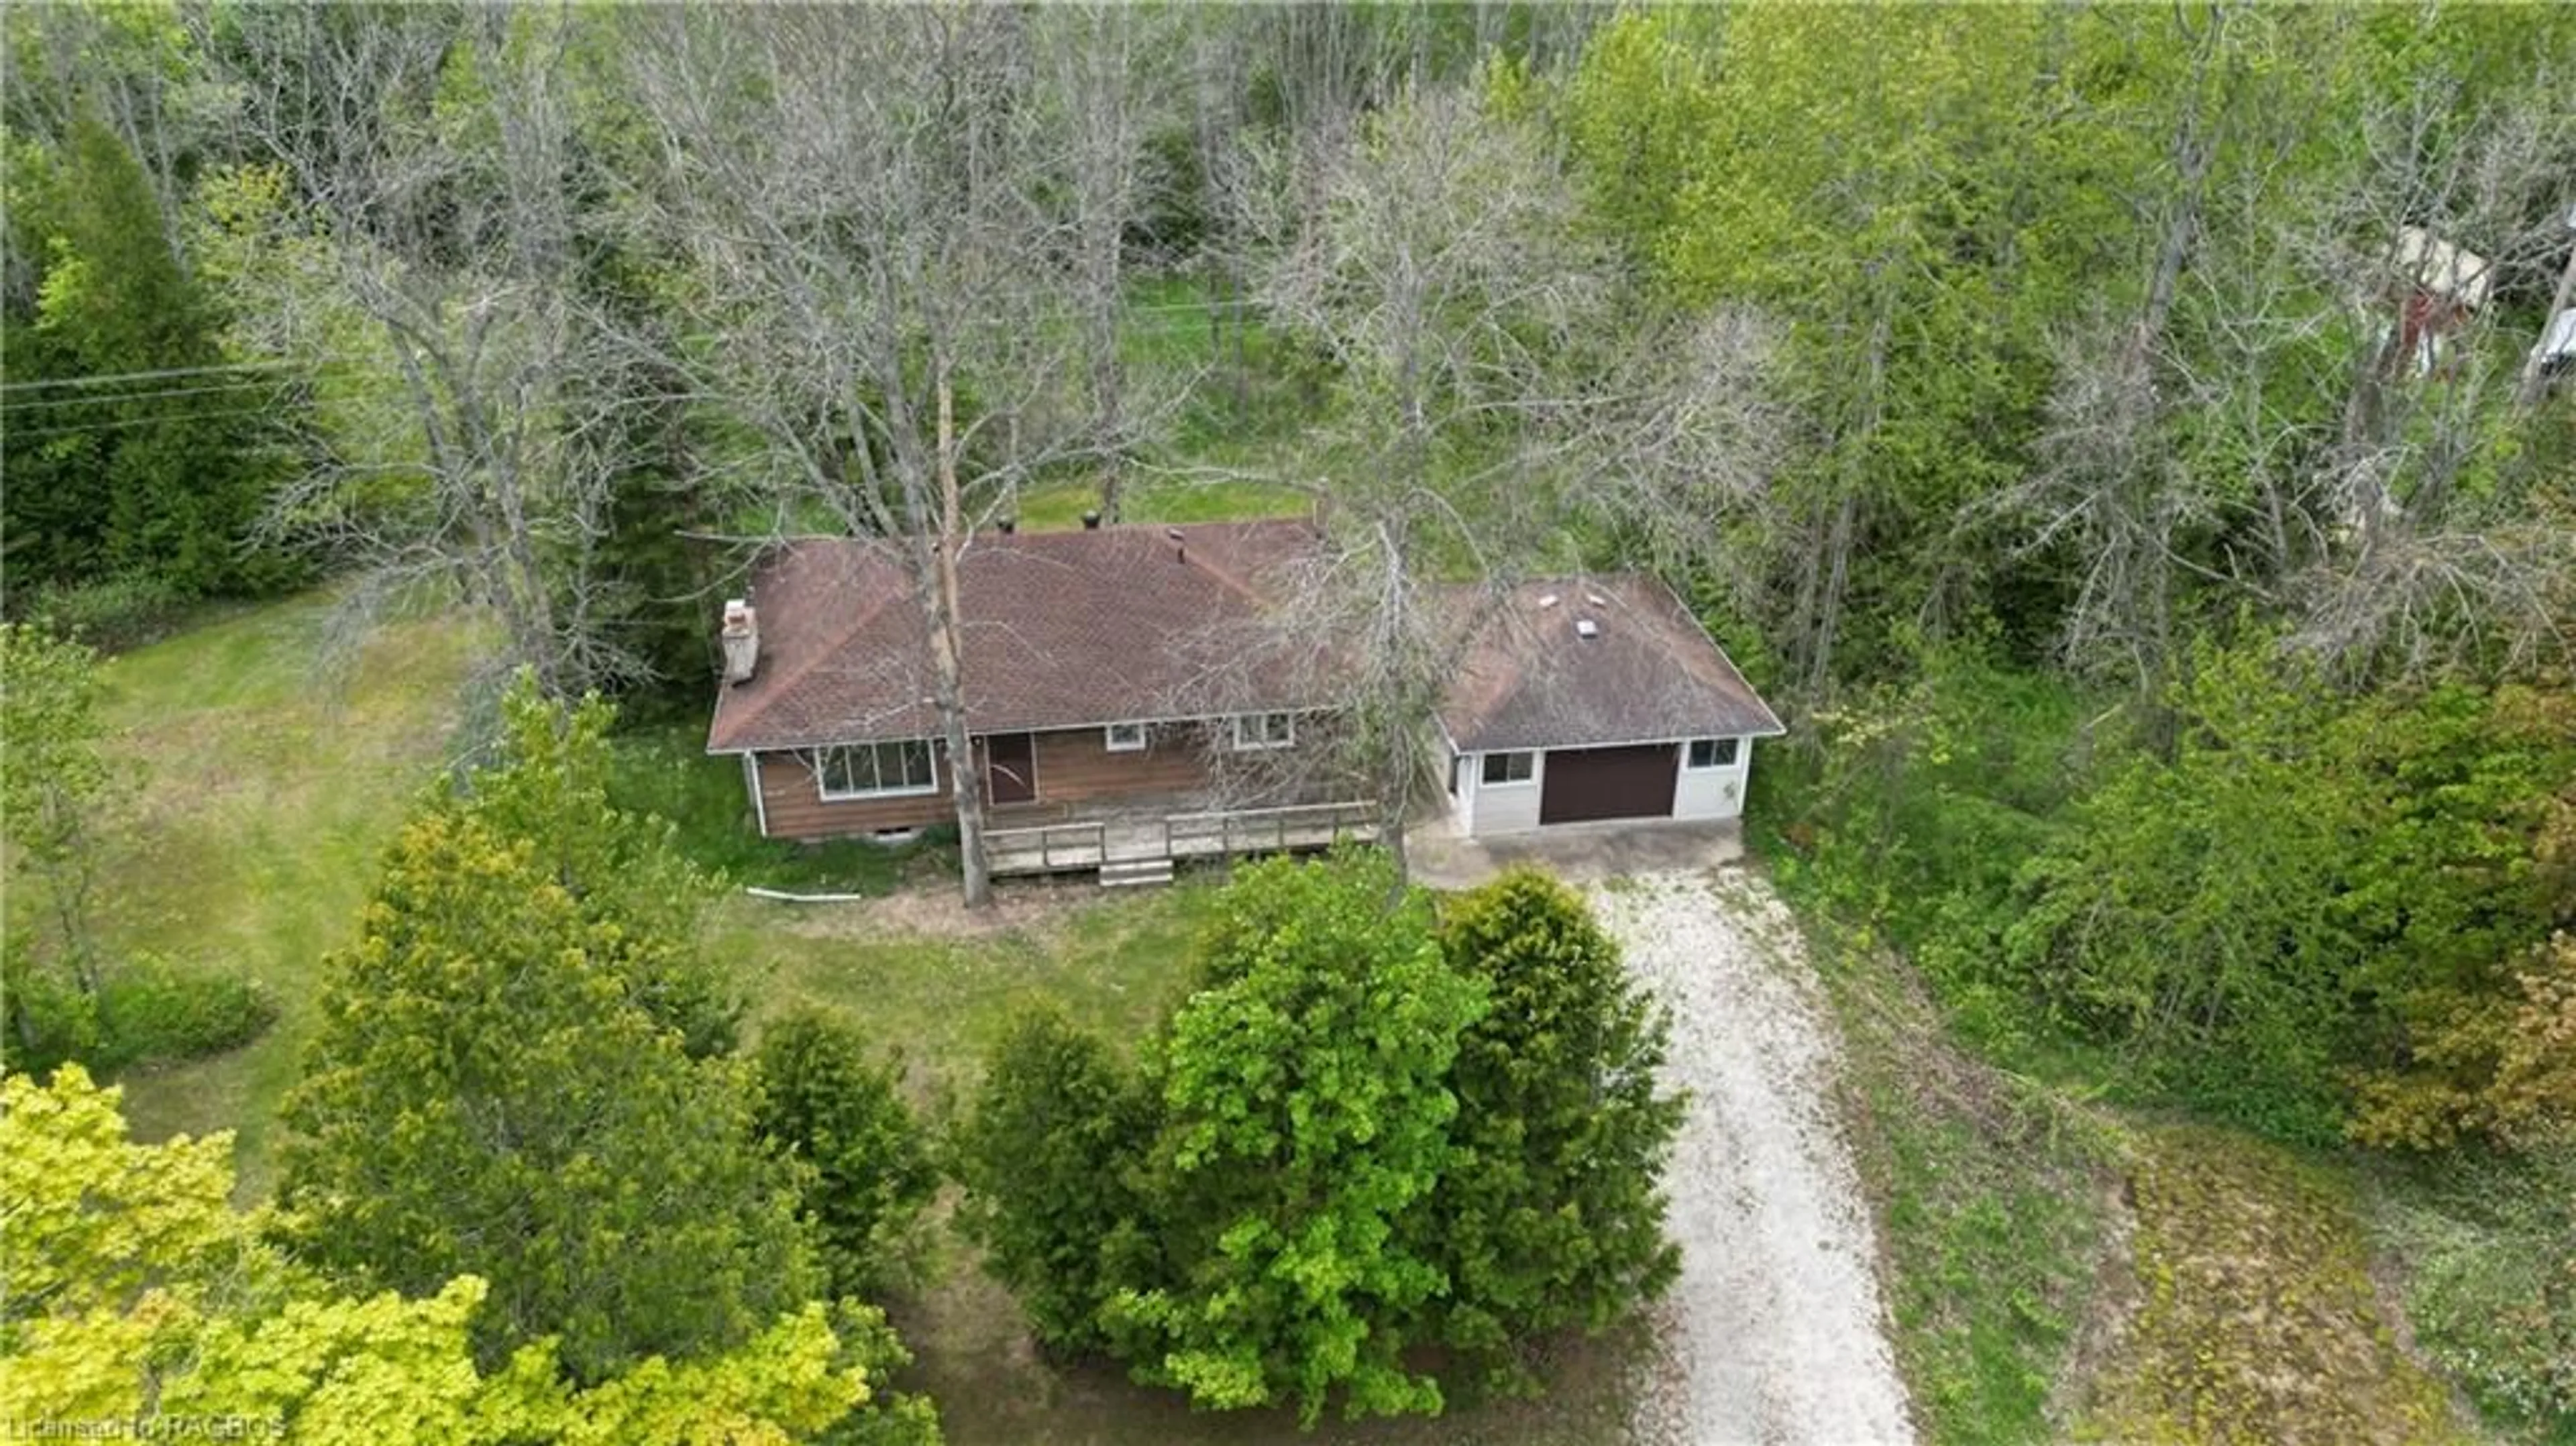 Cottage for 291 Huron Rd, Red Bay Ontario N0H 2T0